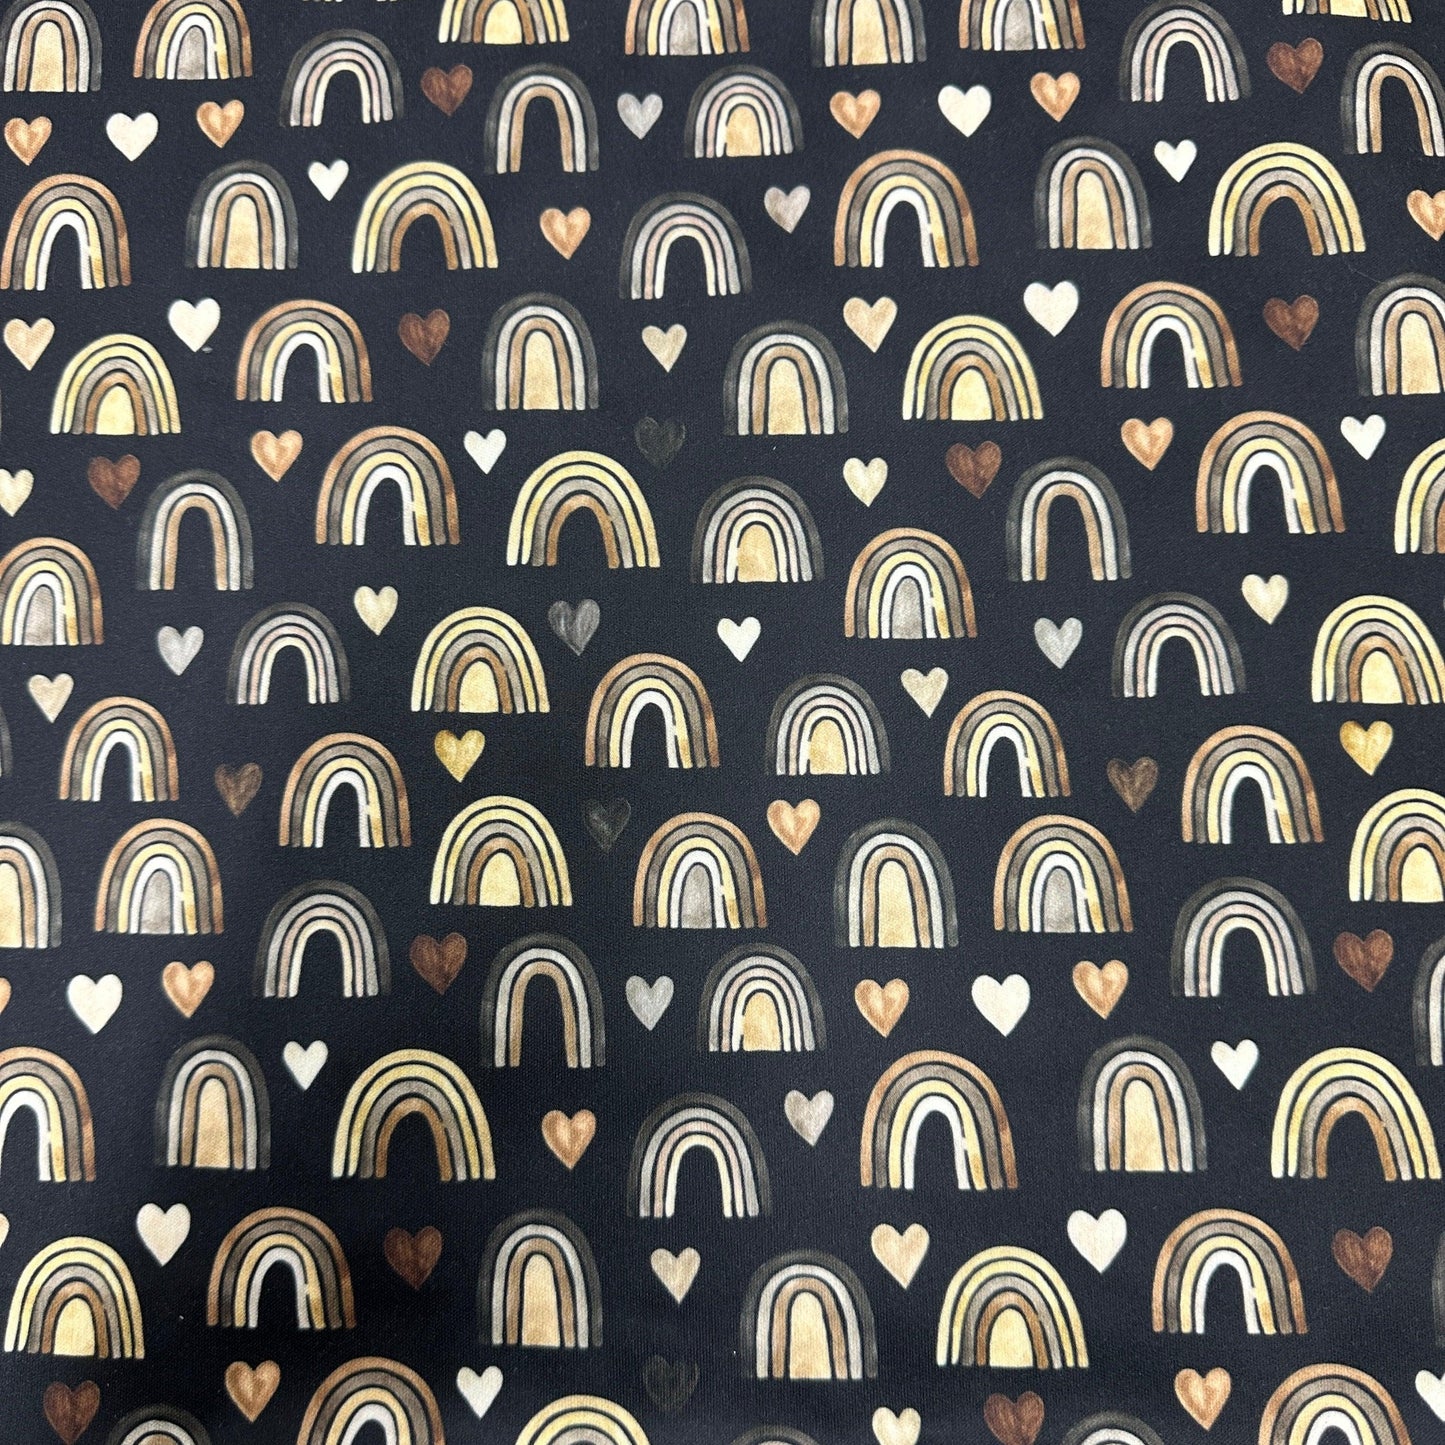 Brown Hearts and Rainbows 1 mil PUL Fabric - Made in the USA - Nature's Fabrics